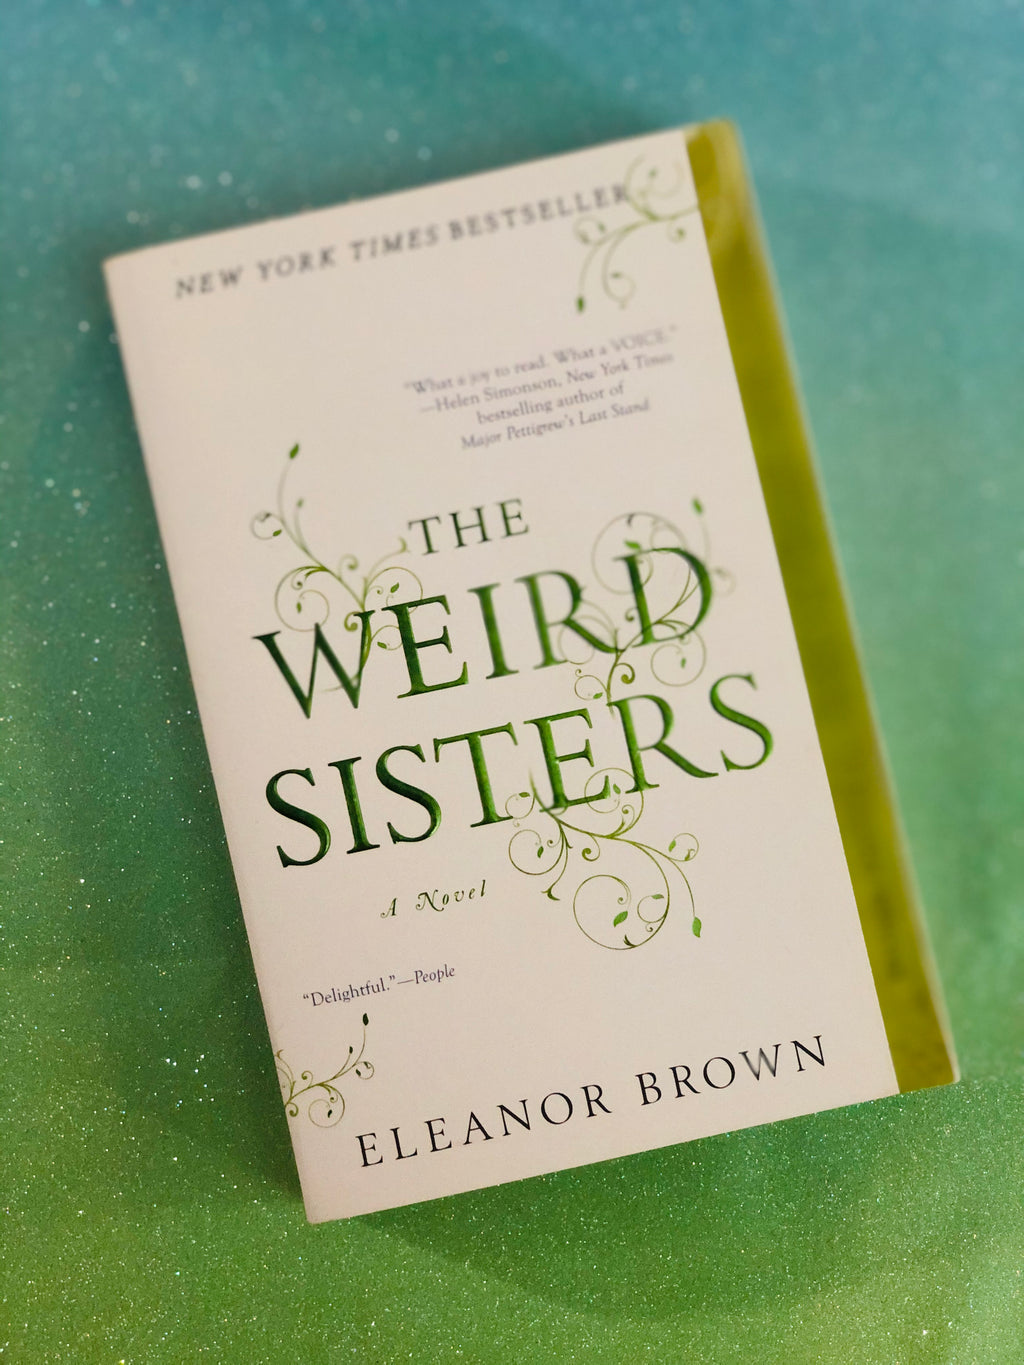 The Weird Sisters- By Eleanor Brown